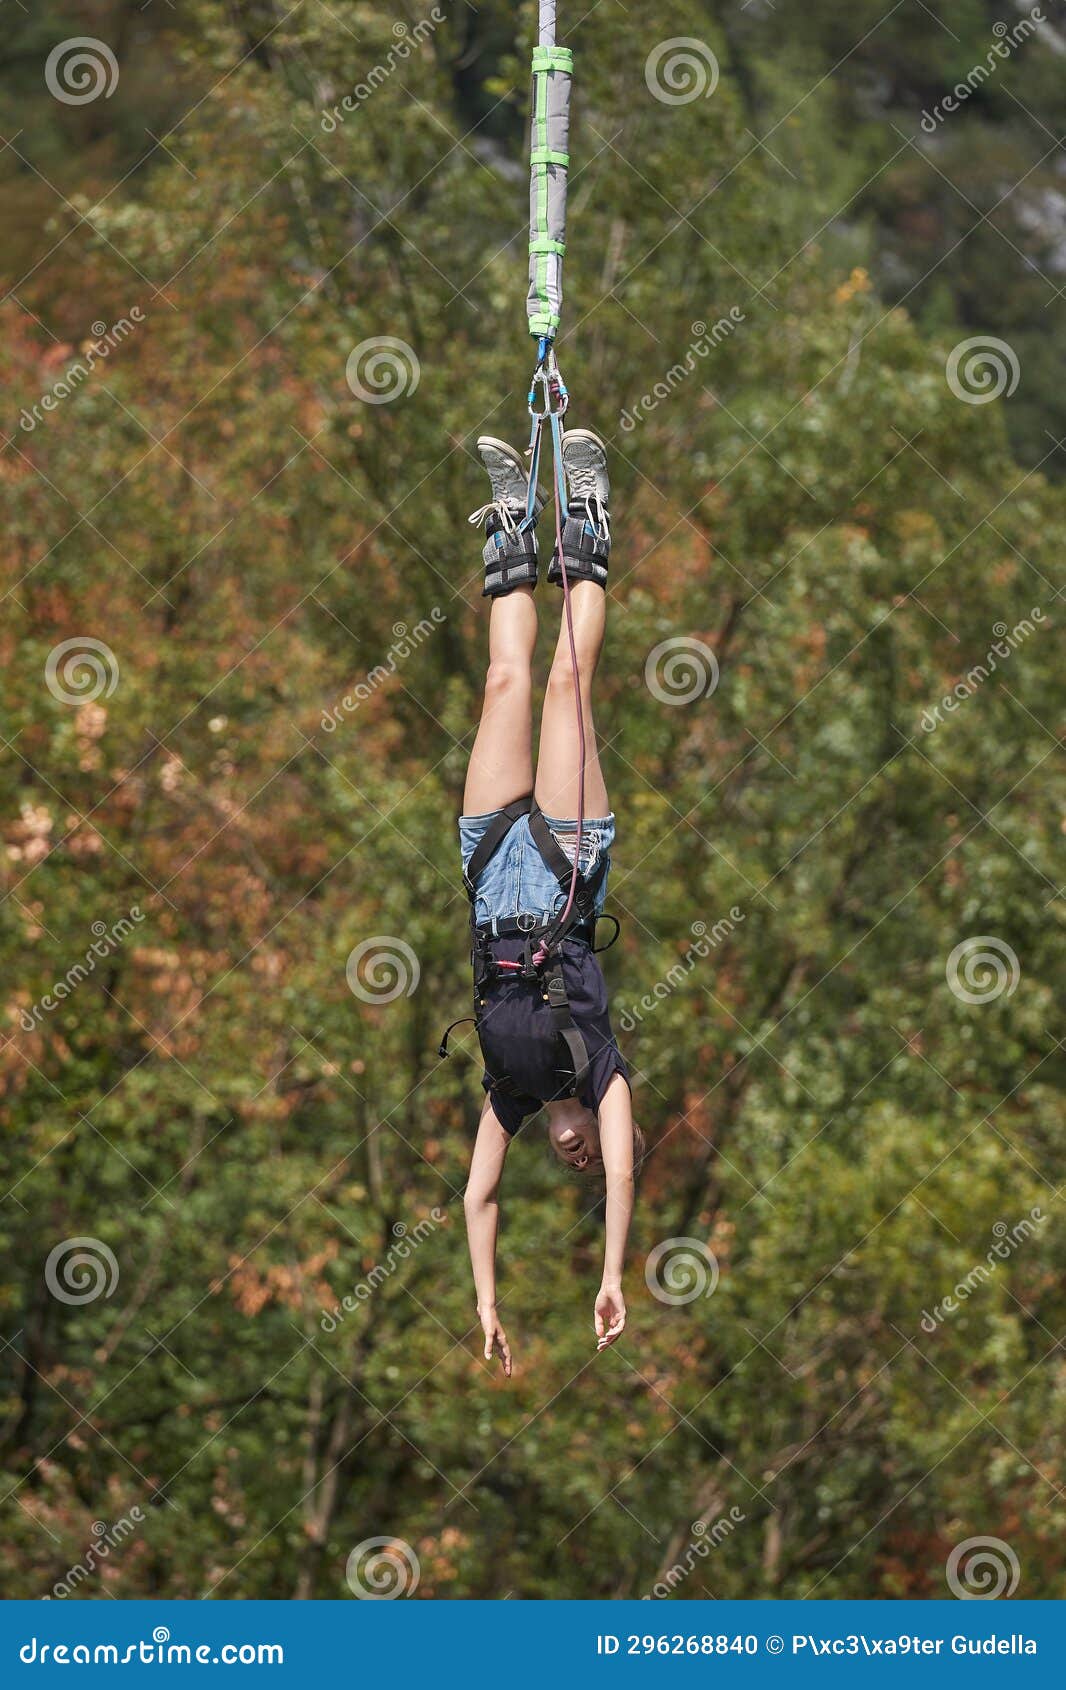 bungee jumping young woman